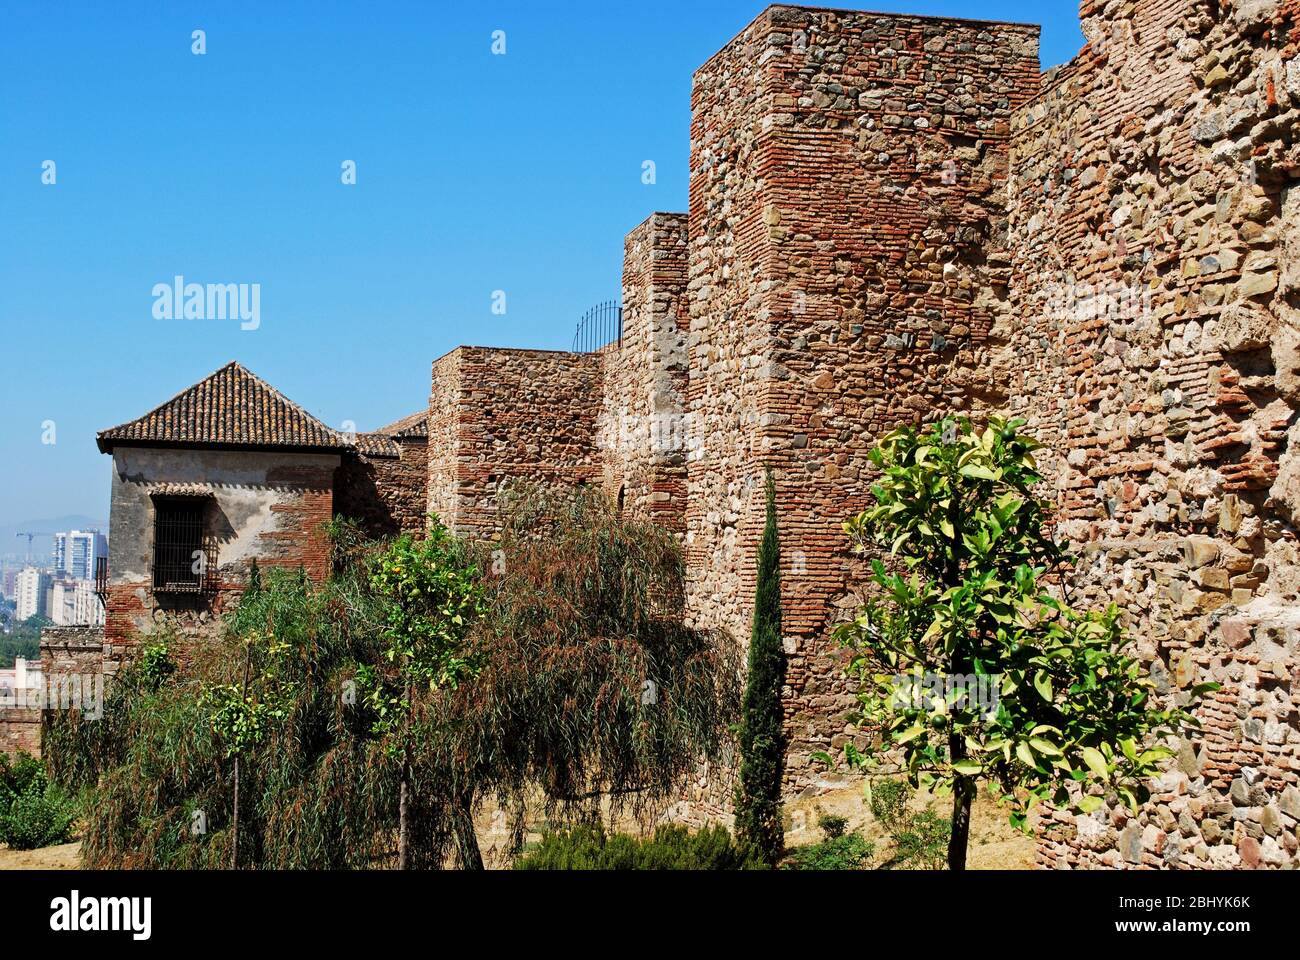 Upper walled precinct of the citadel viewed from the South at Malaga castle, Malaga, Malaga Province, Andalucia, Spain, Europe. Stock Photo